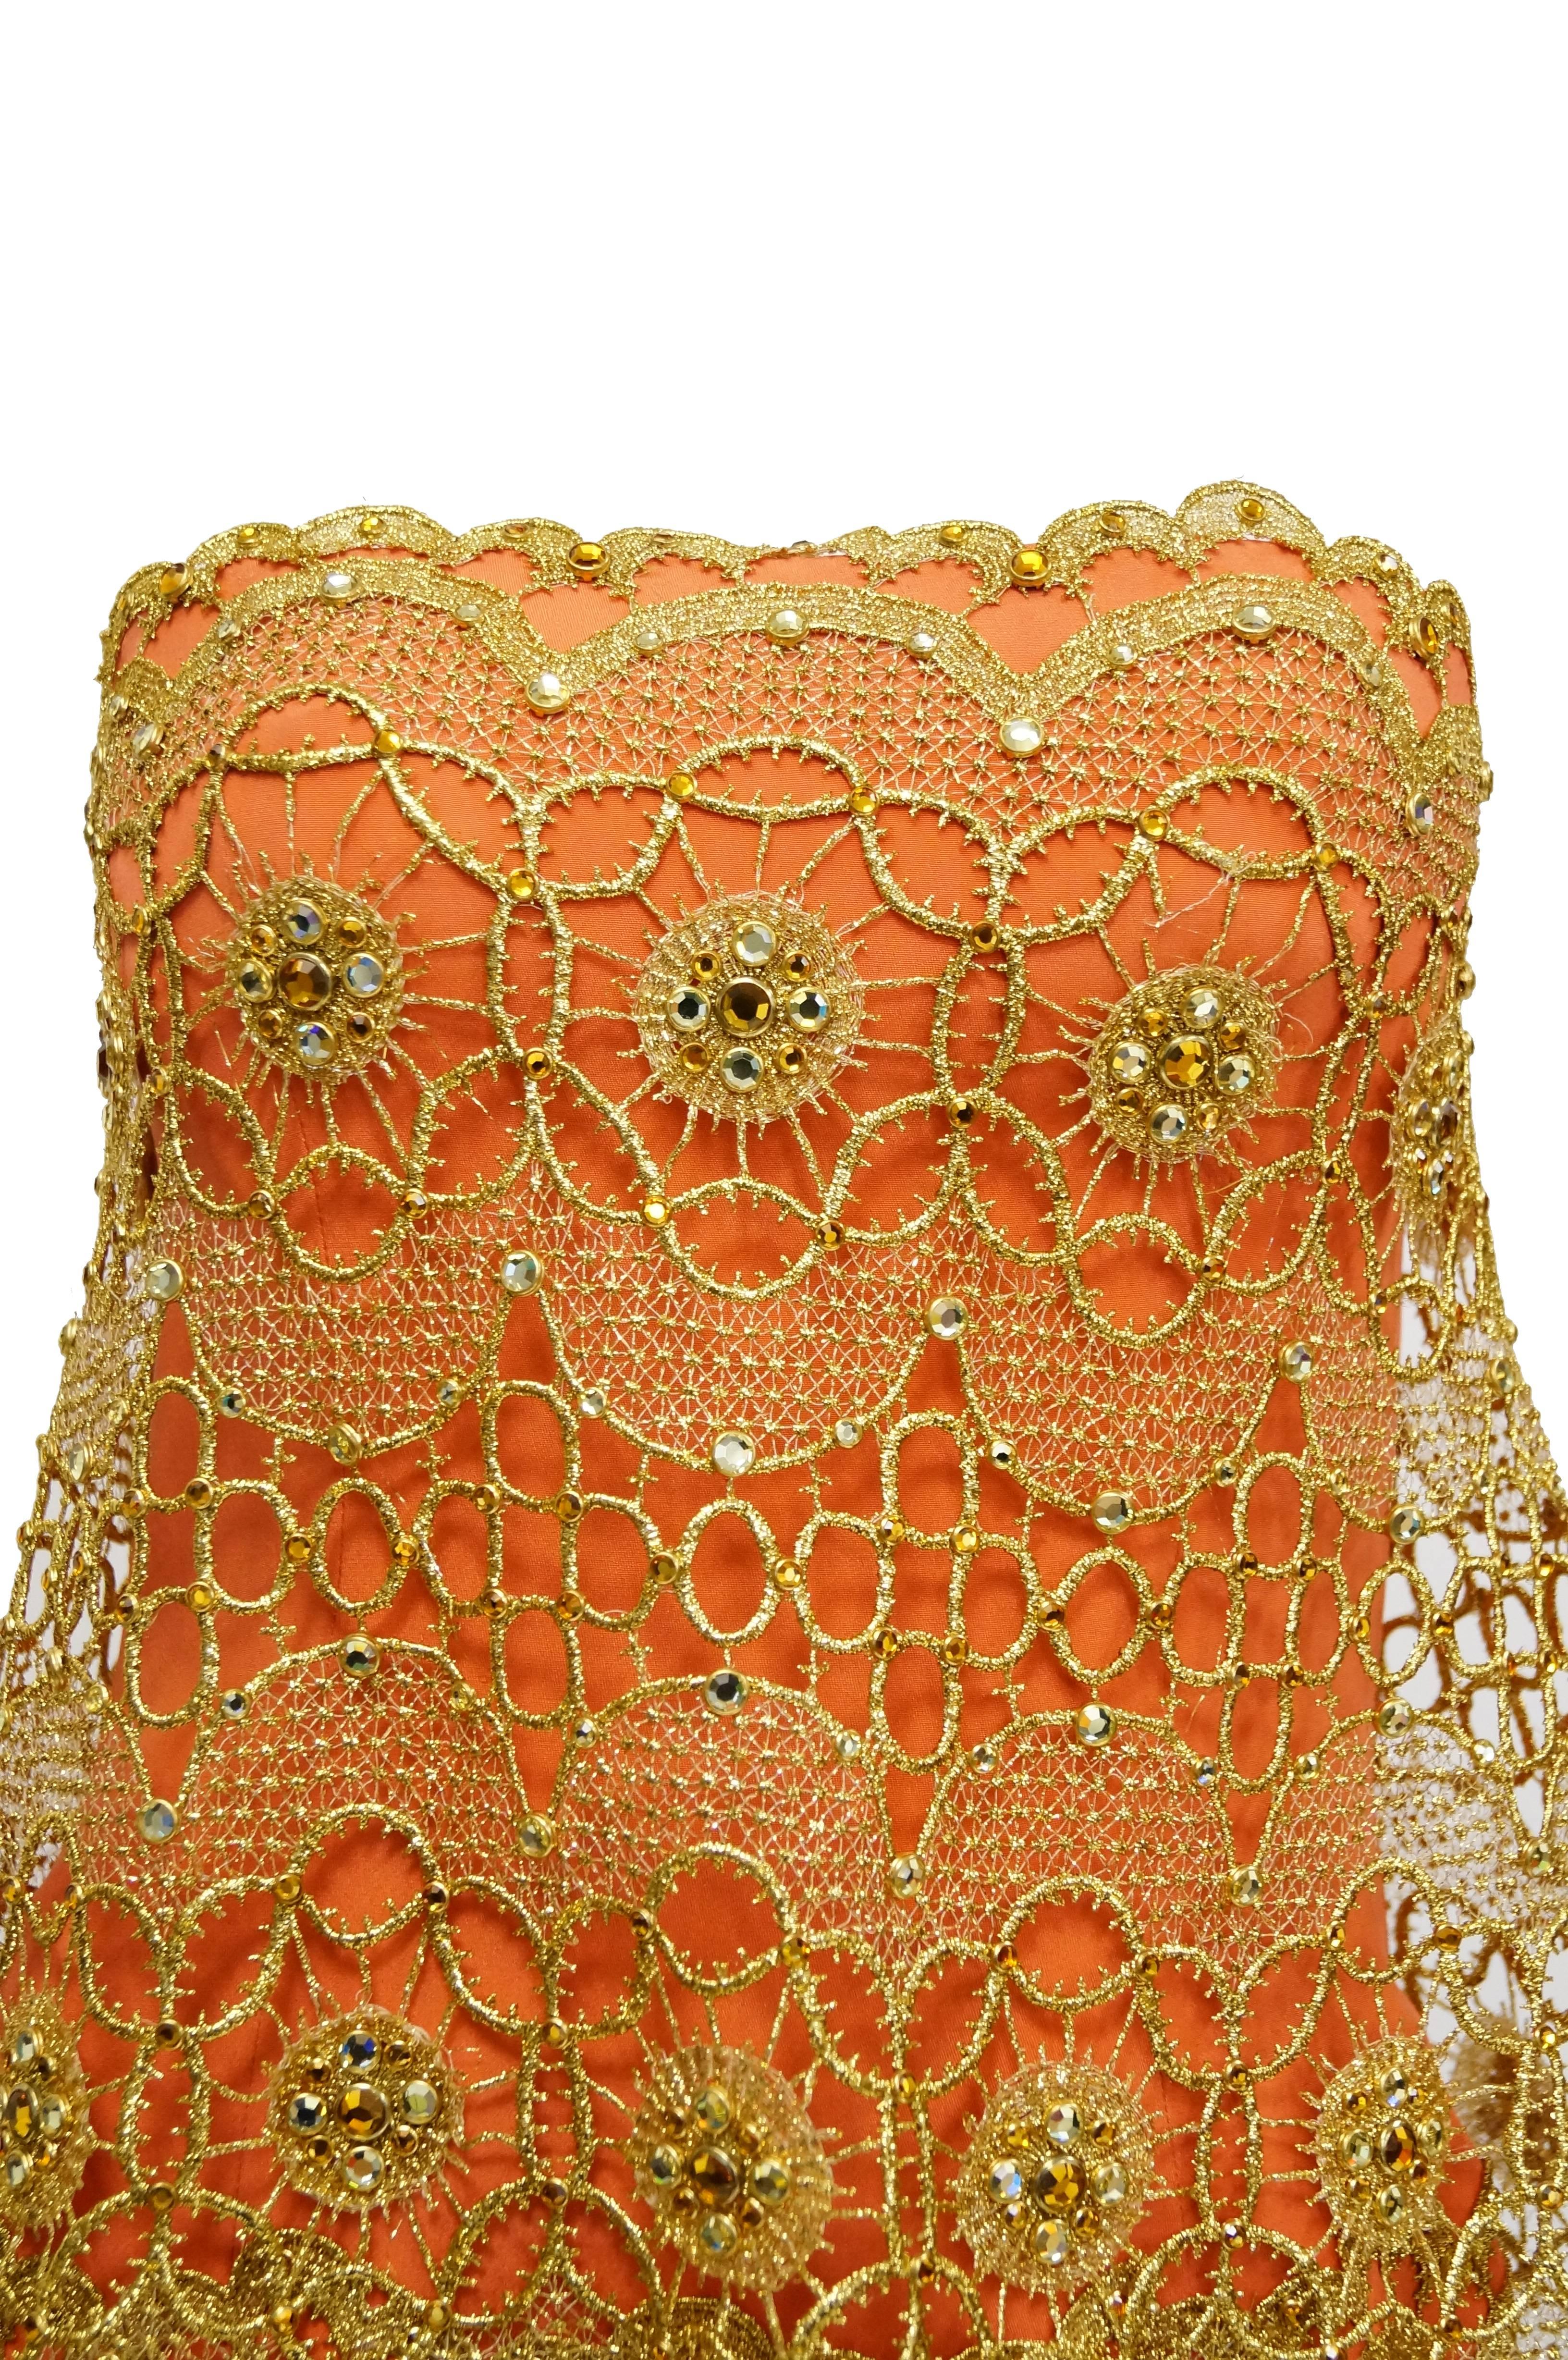 Tangerine form fitting cocktail (or party!) dress by Bob Mackie. The dress is thigh-length and consists of a tangerine fitted sheath dress under layers of gilded lace. The lace extends out from the neckline and the hip. The lace is geometric and